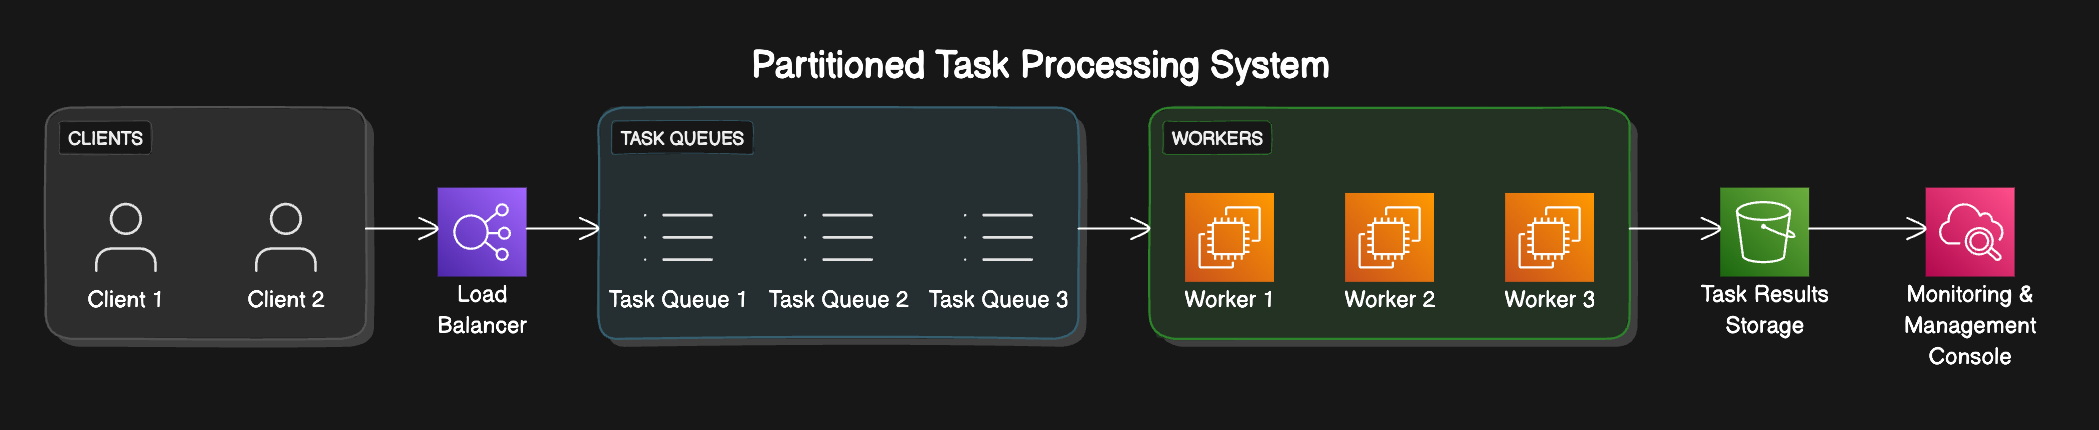 An Image showing Clients(Producers) using a load balancing technique to assign workloads to queues and then workers processing the workloads.